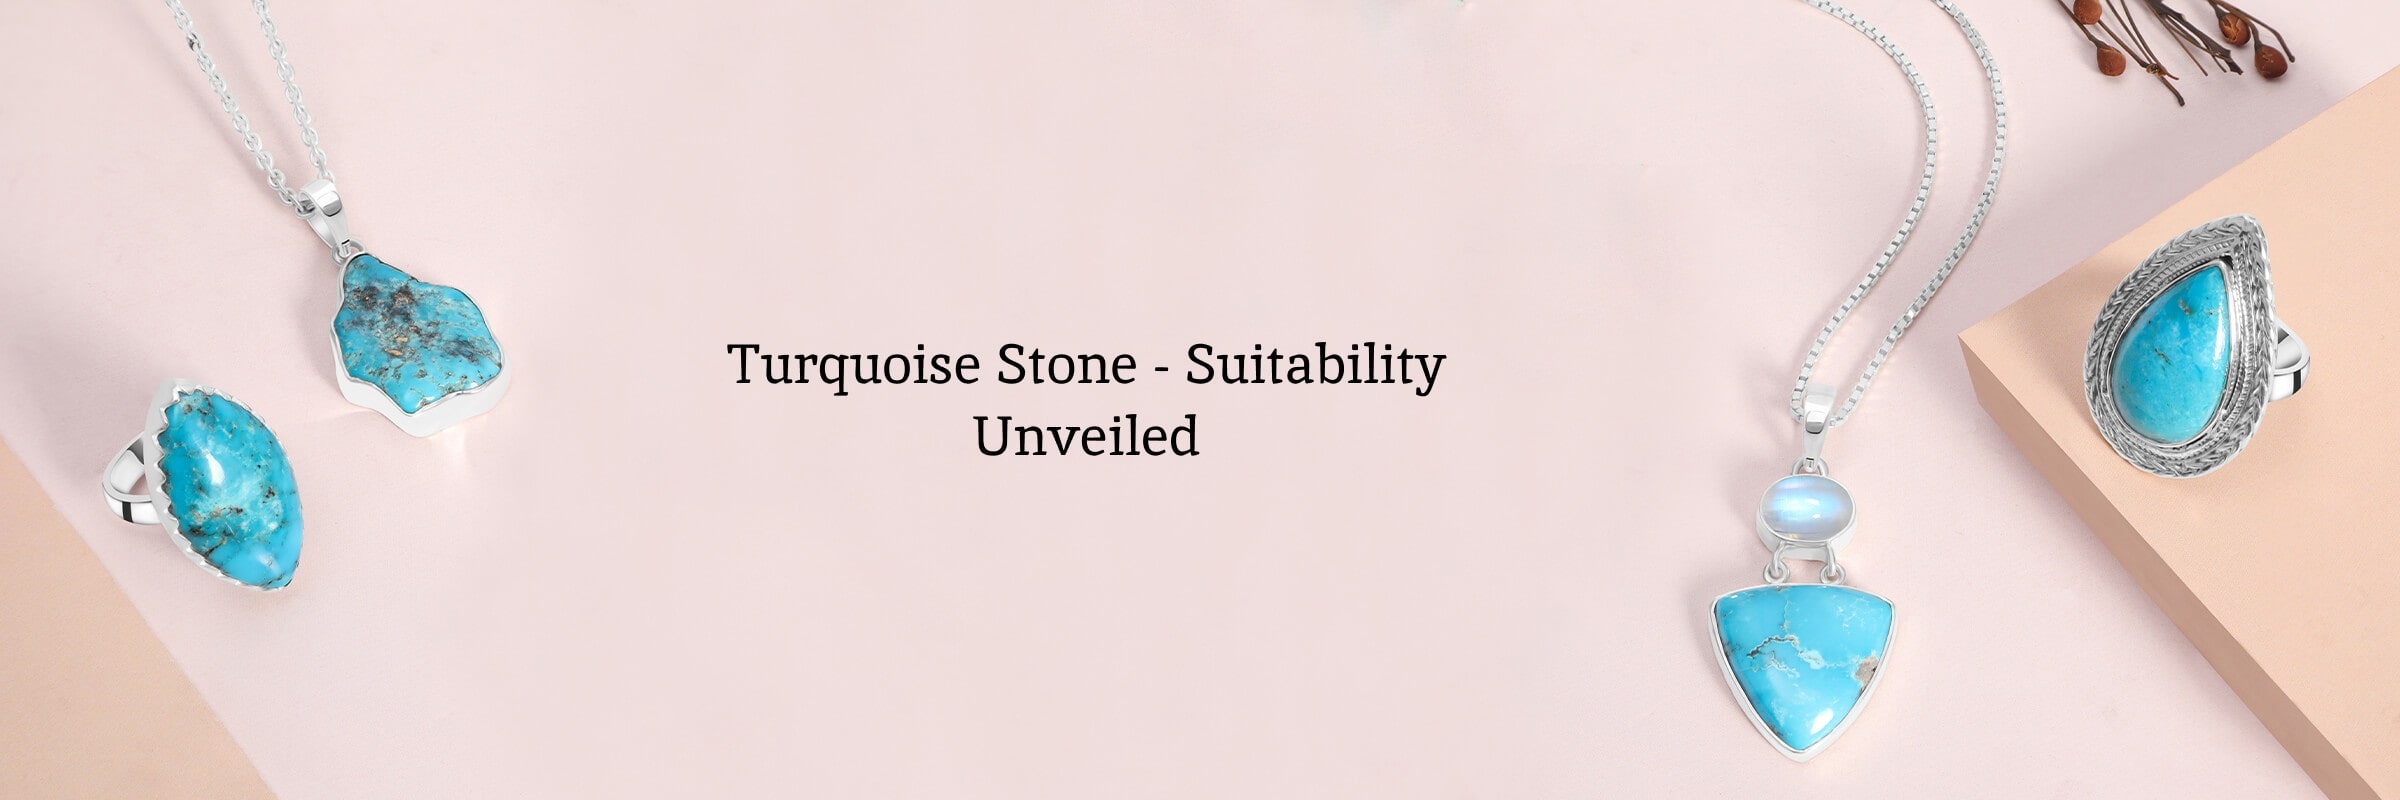 Who Should Wear Turquoise Stone?